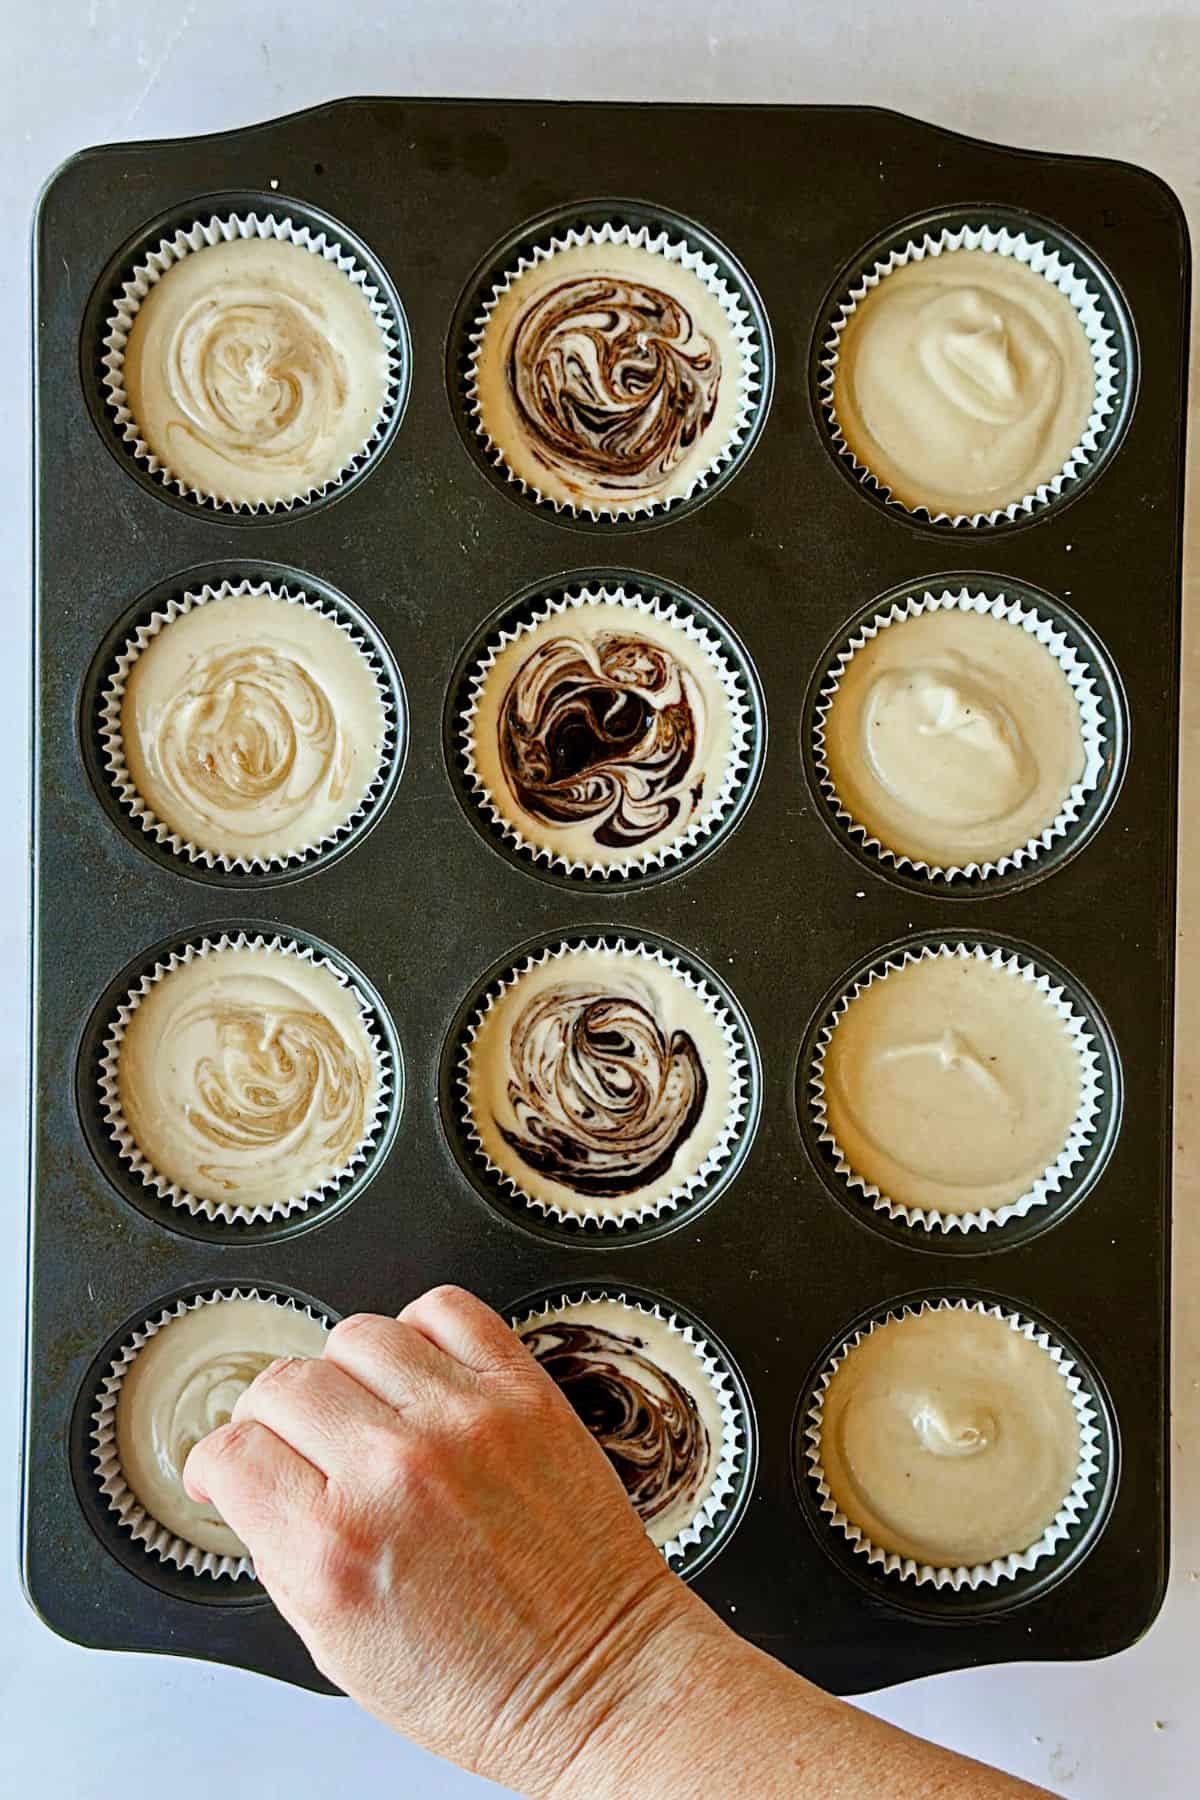 top view of hand holding a toothpick while it stirs in the peanut butter and chocolate add in to one of the cheese cakes.